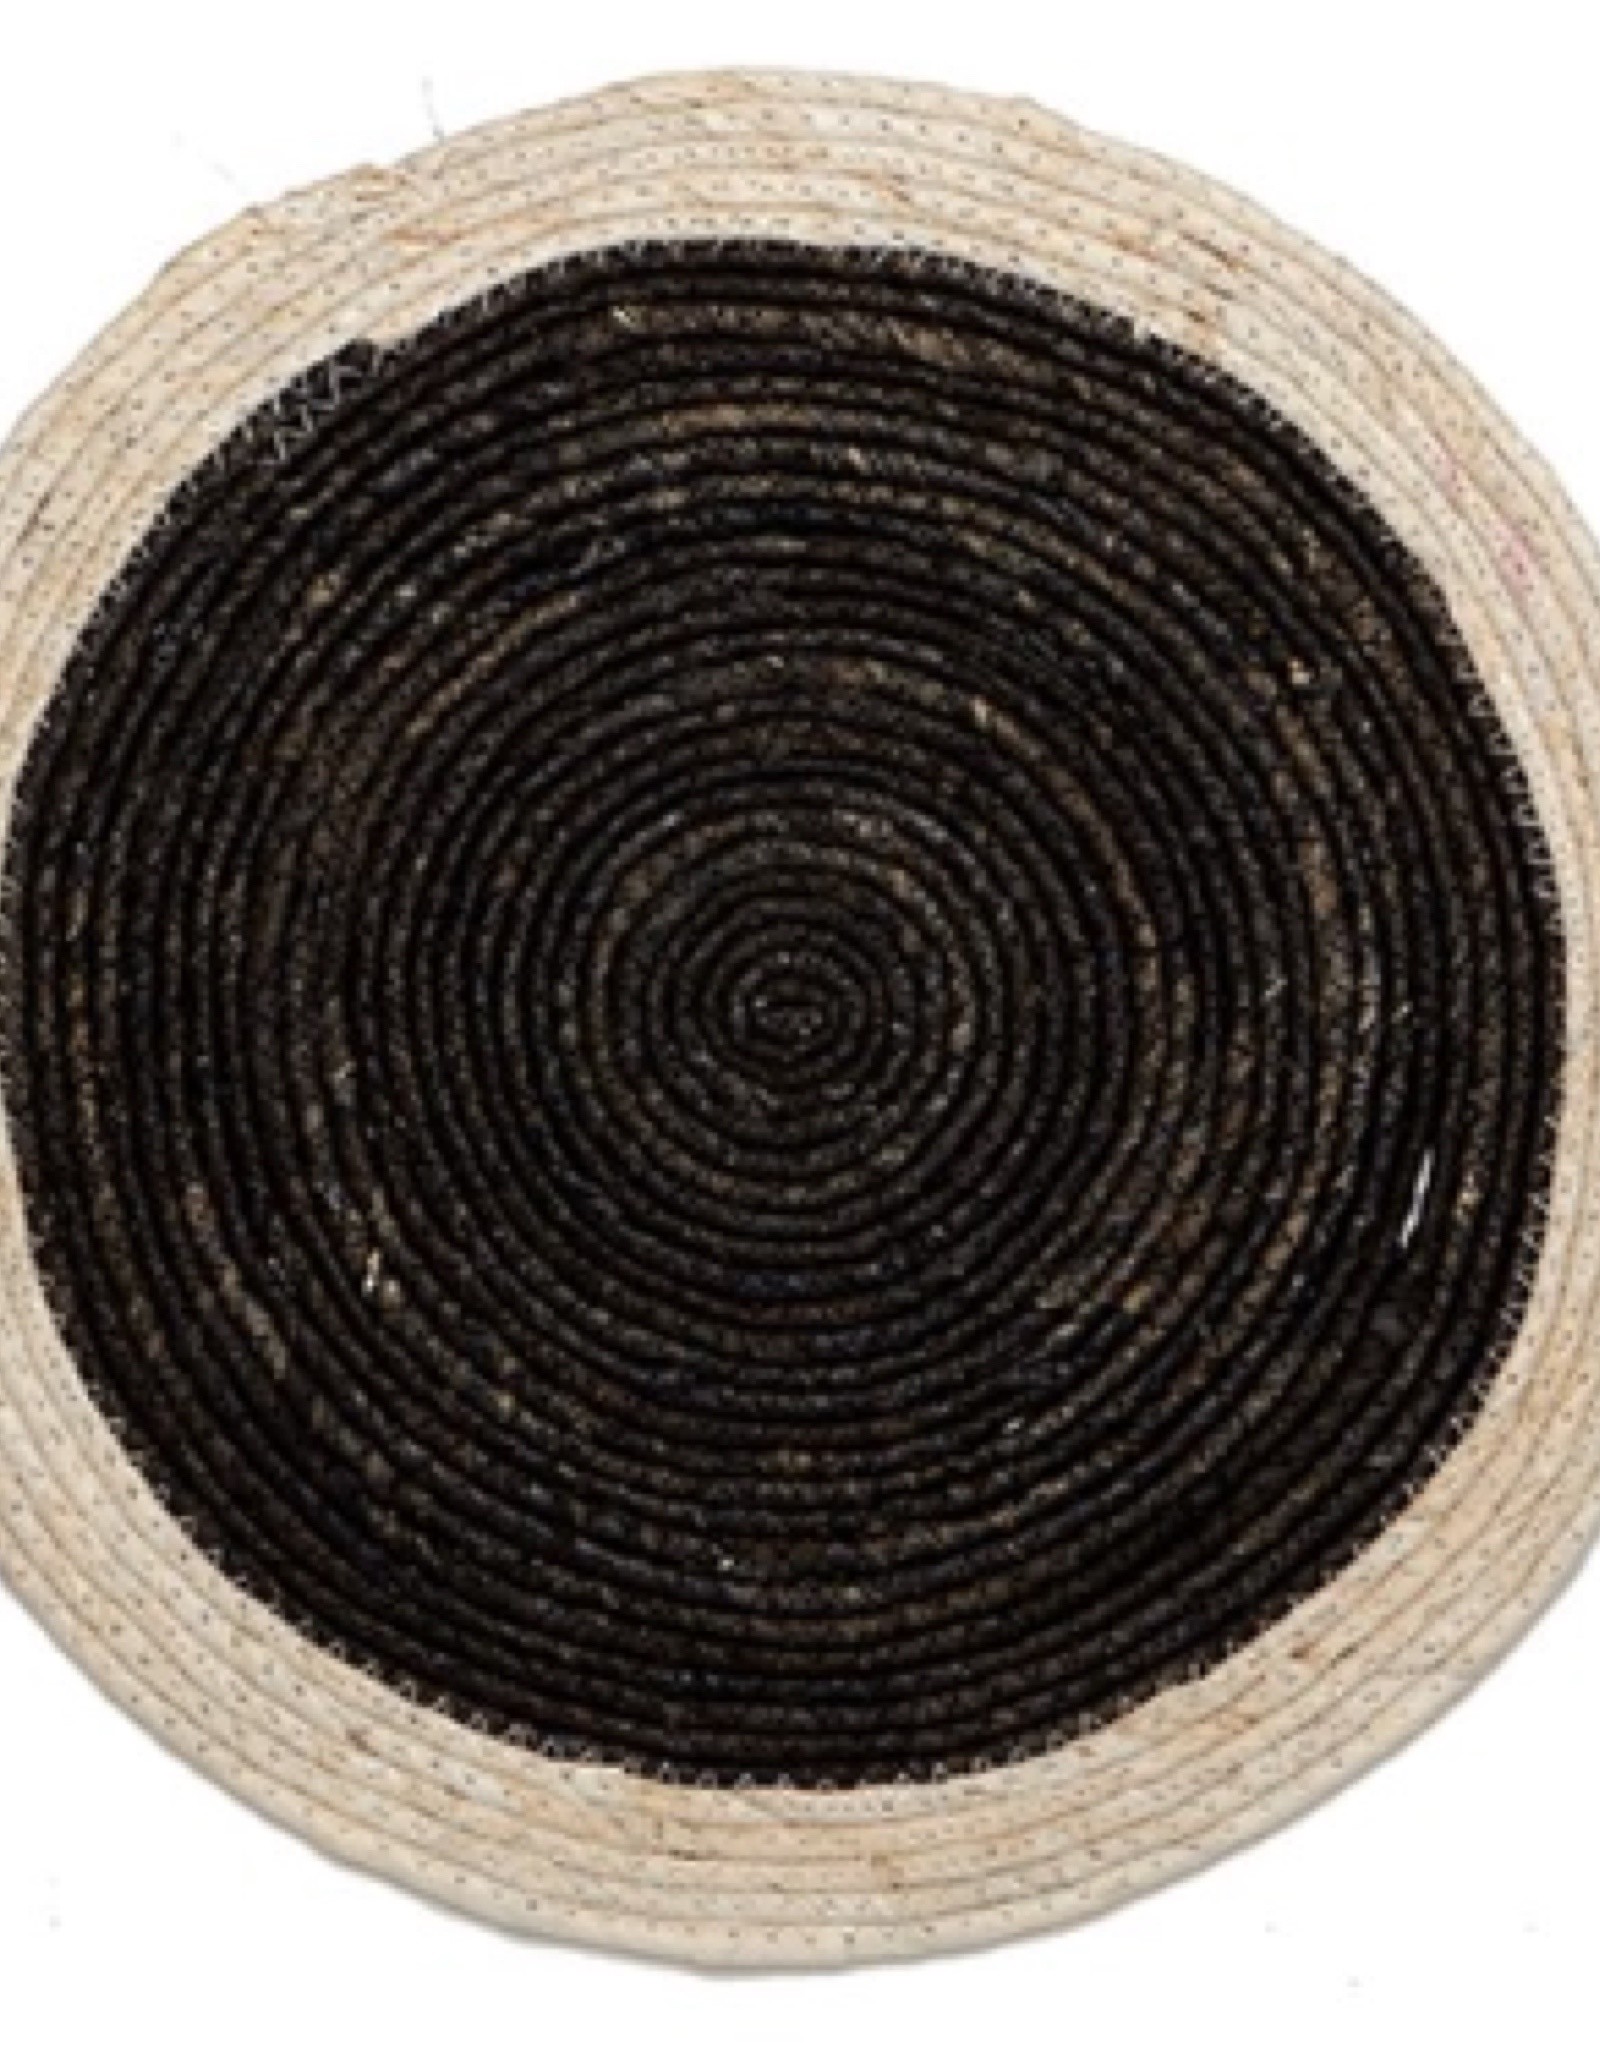 Placemat Harman Natural Woven Round Black 1869707